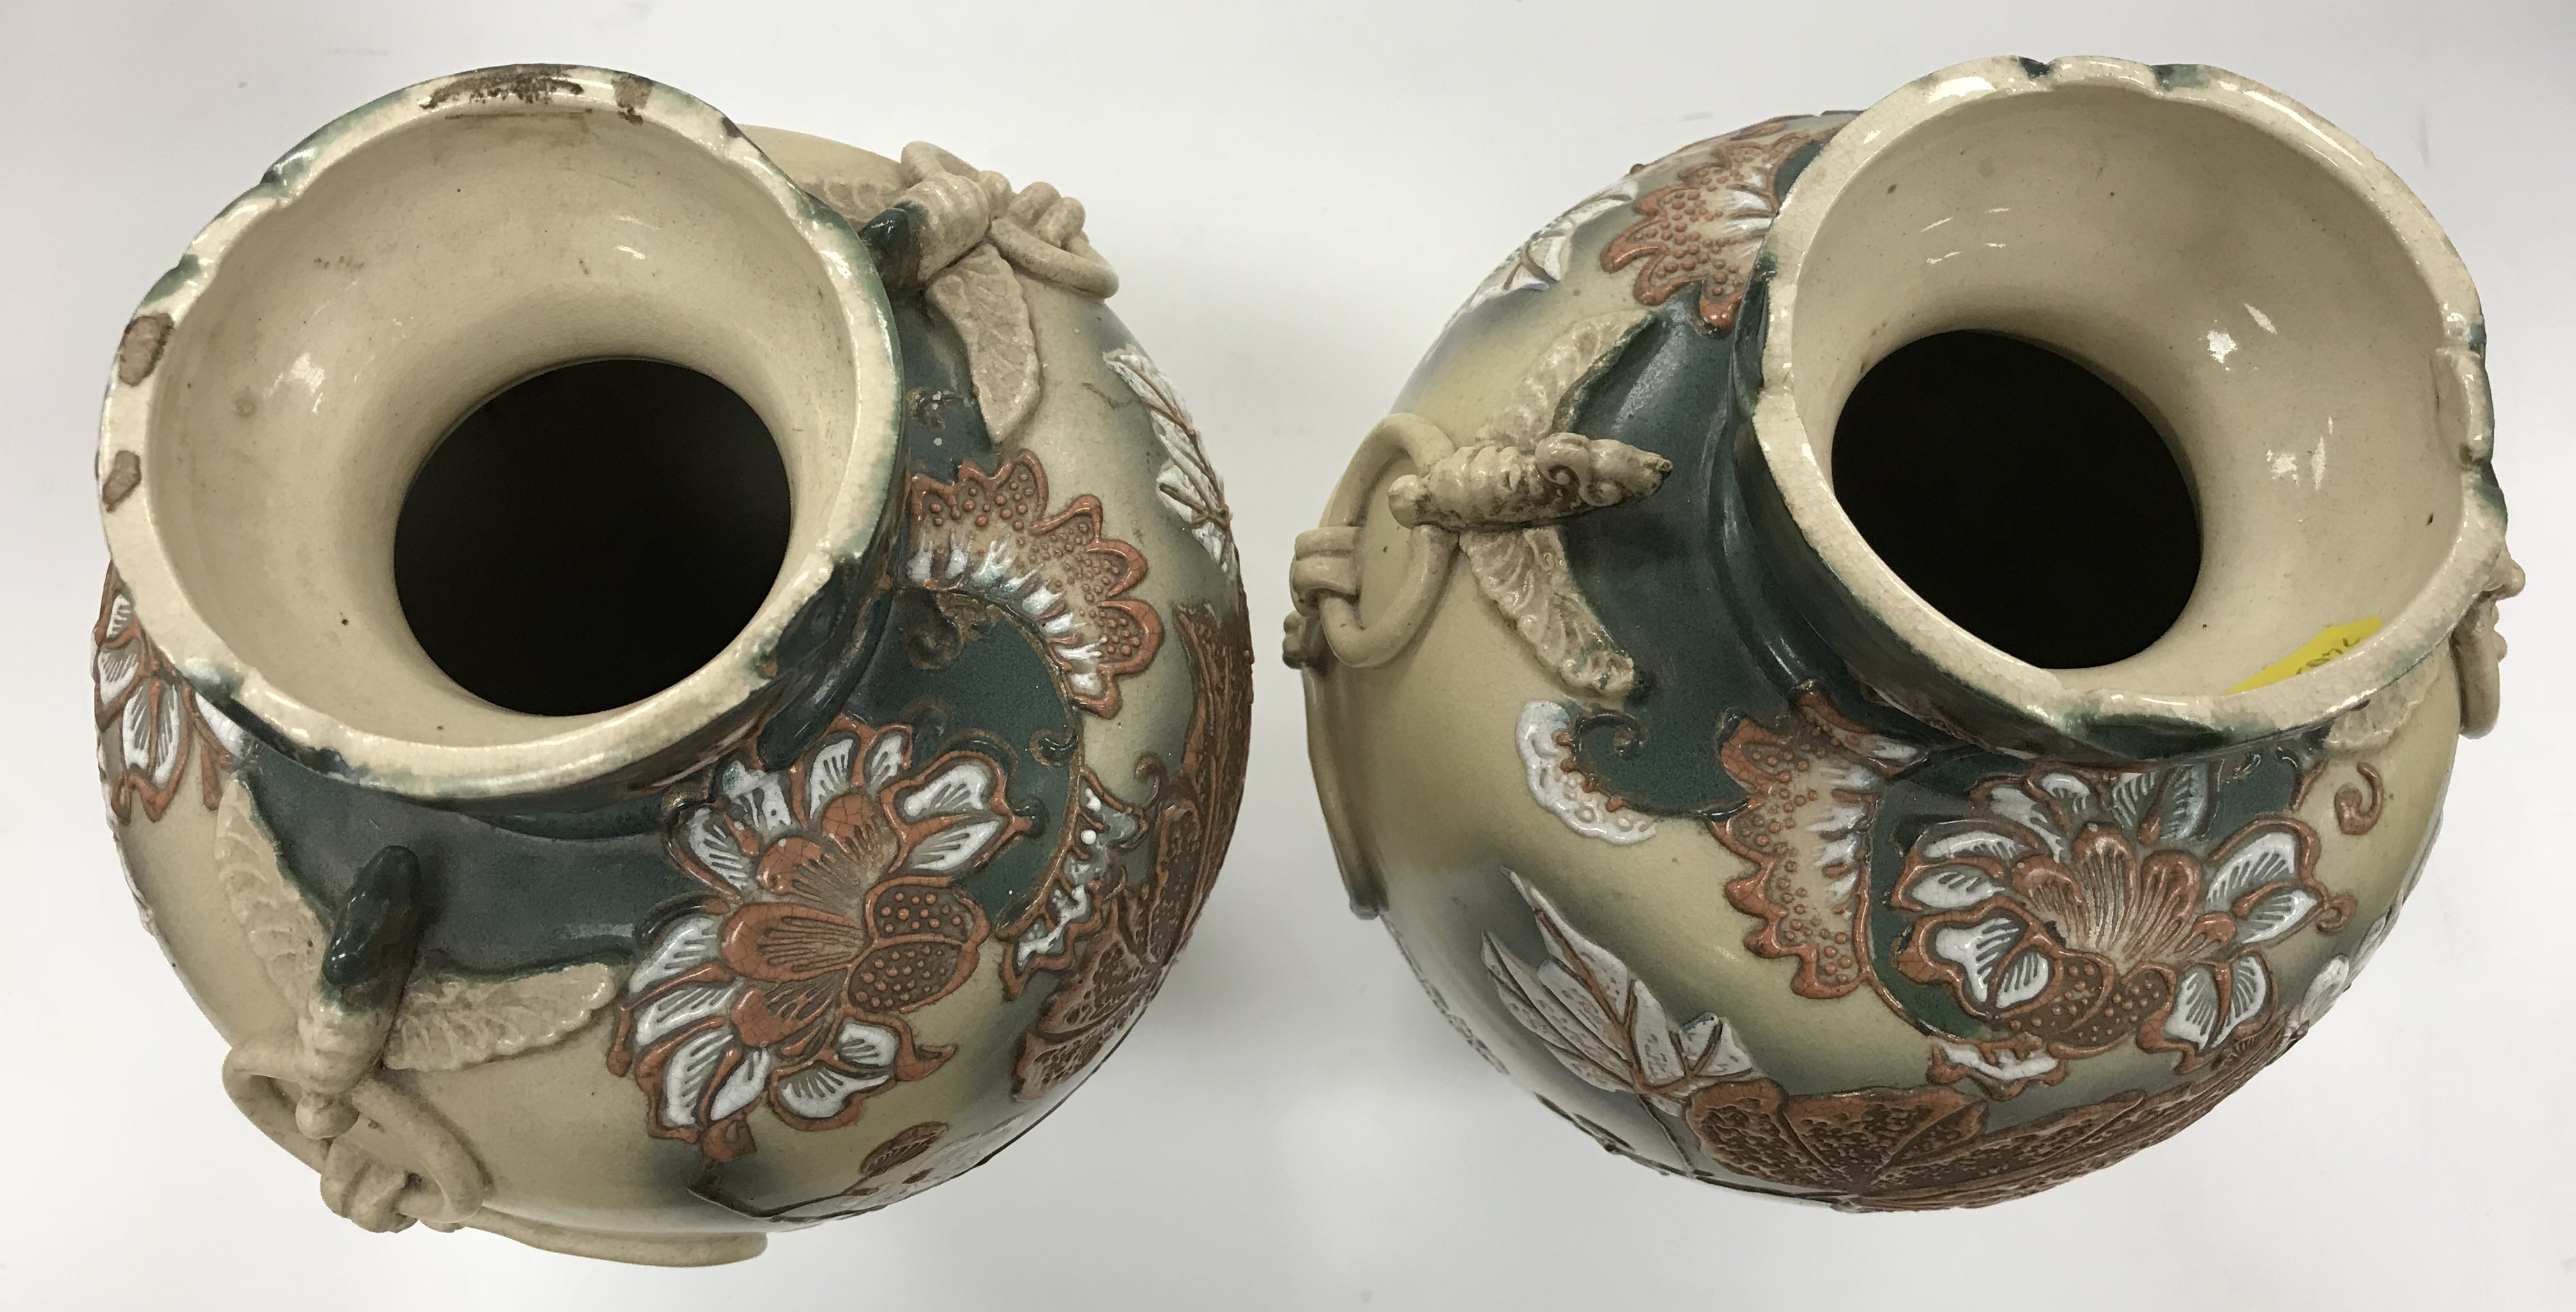 A pair of early 20th Century Japanese satsuma ware vases with relief work bird and knot decorated - Image 4 of 4